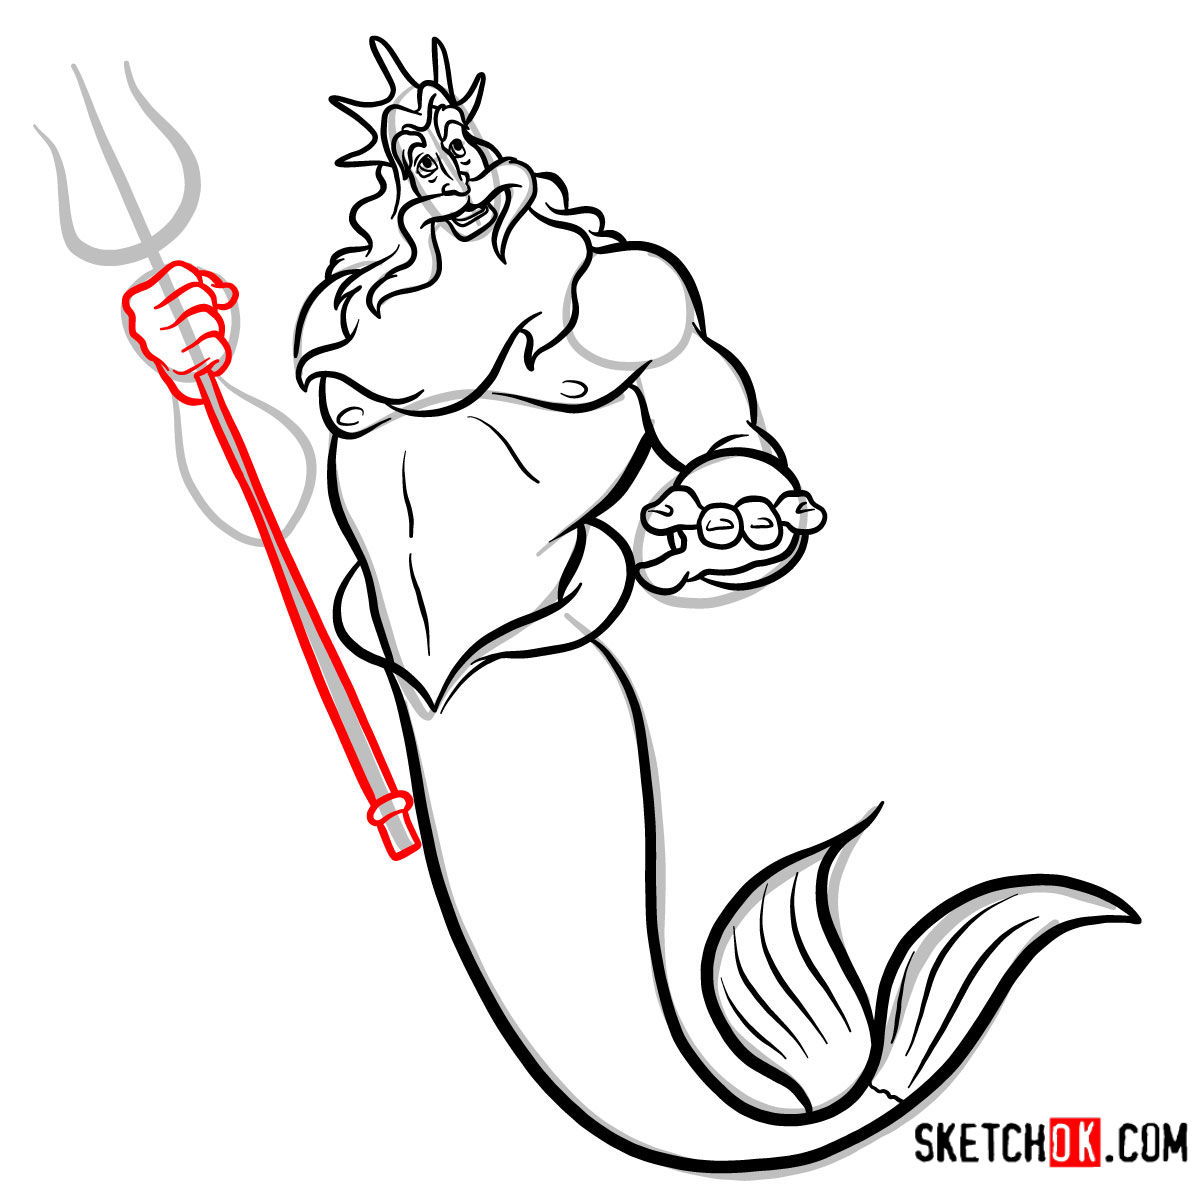 How to draw King Triton | The Little Mermaid - step 10